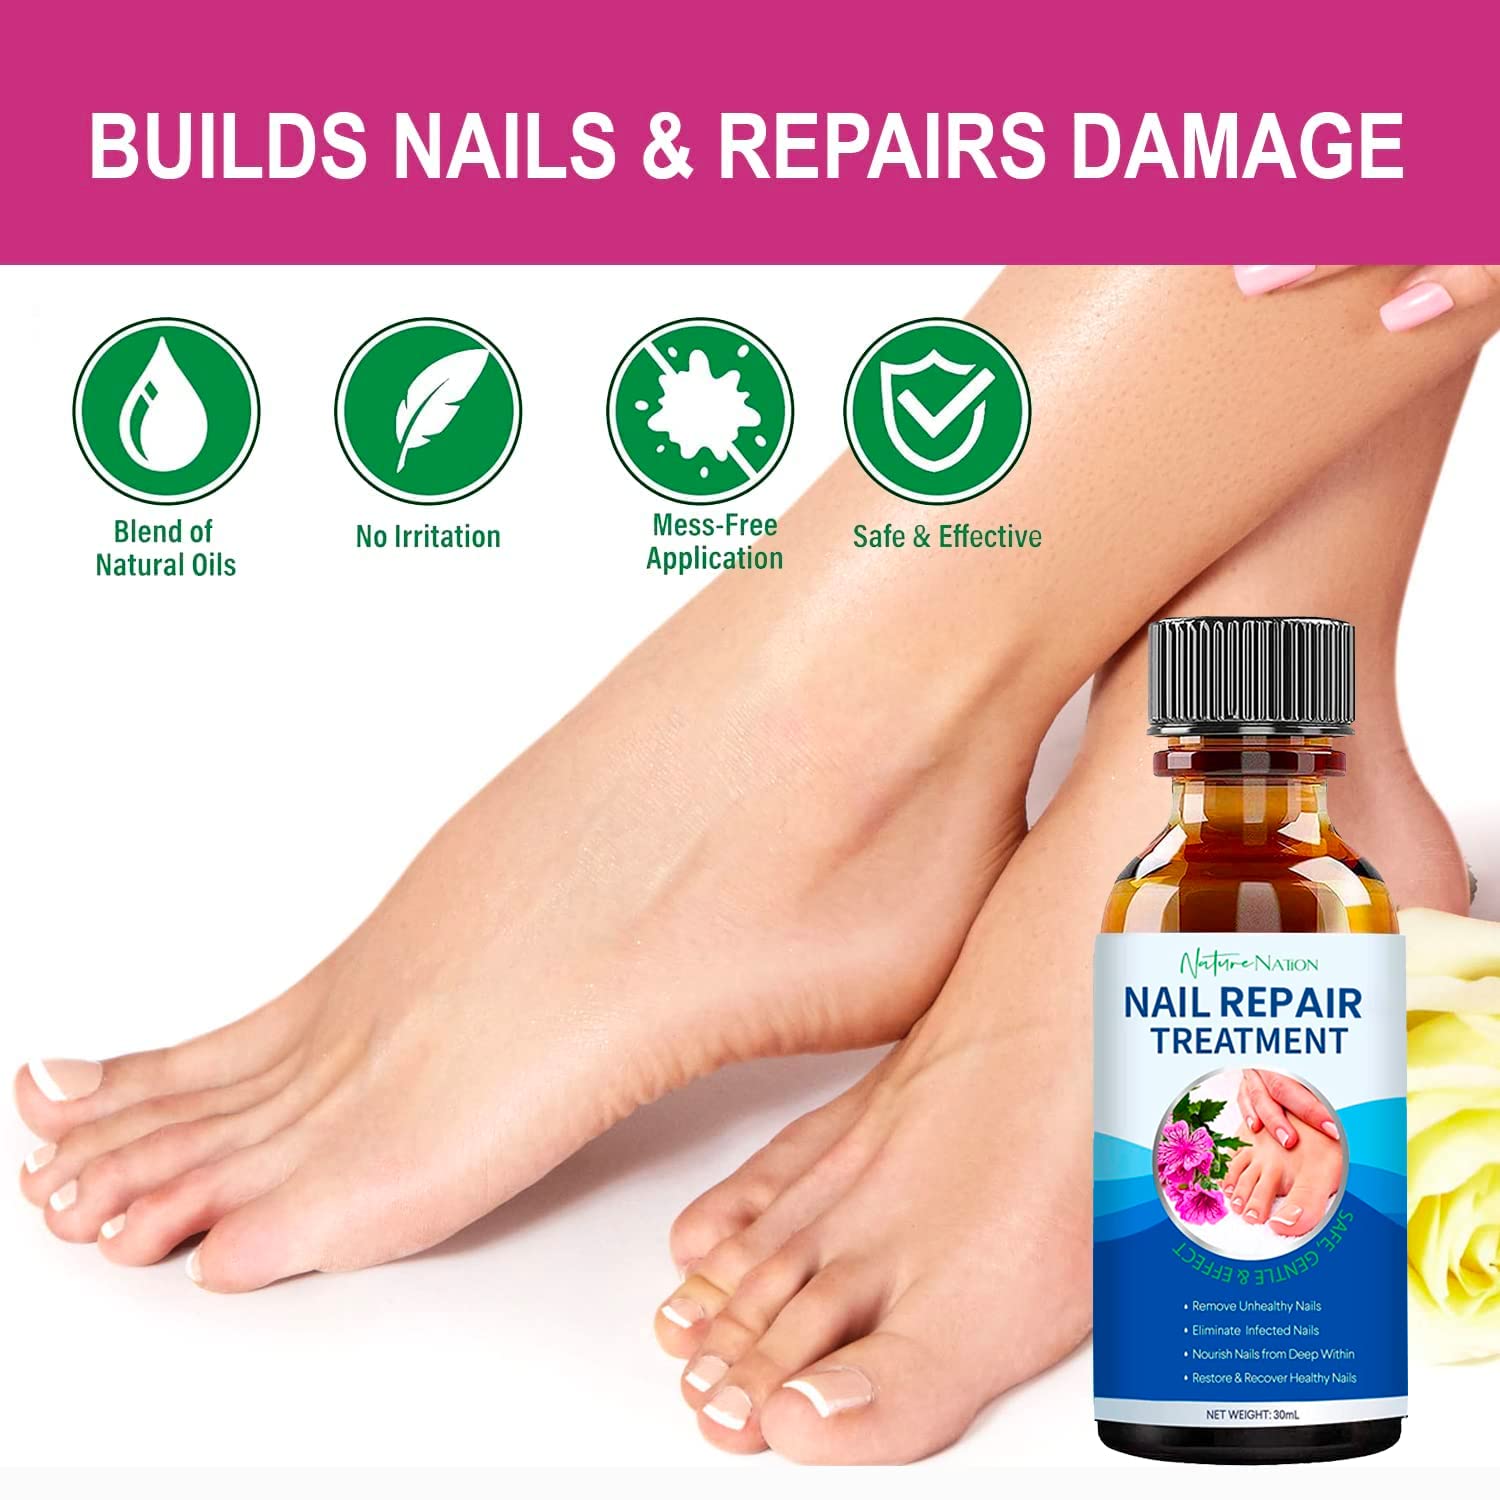 Nature Nation Toenail Fungus Treatment - Extra Strength for Nail & Fingernails Repair Solution - Discolored and Damaged Nails Renew Cracked To